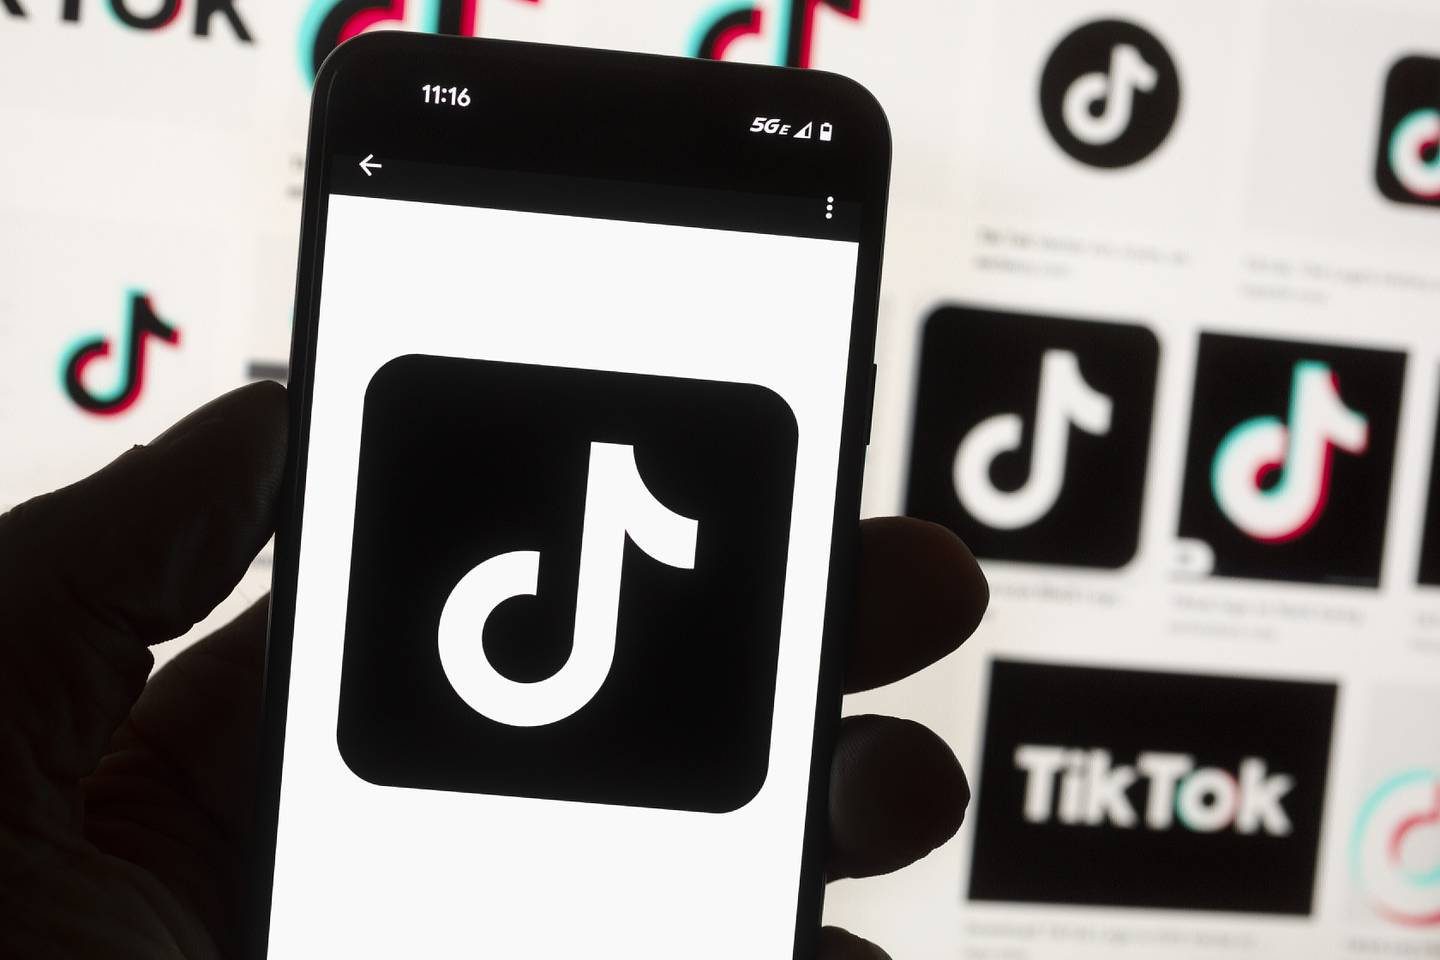 TikTok: Bans against the Chinese app increase, with the United States, Canada and the European Union at the forefront